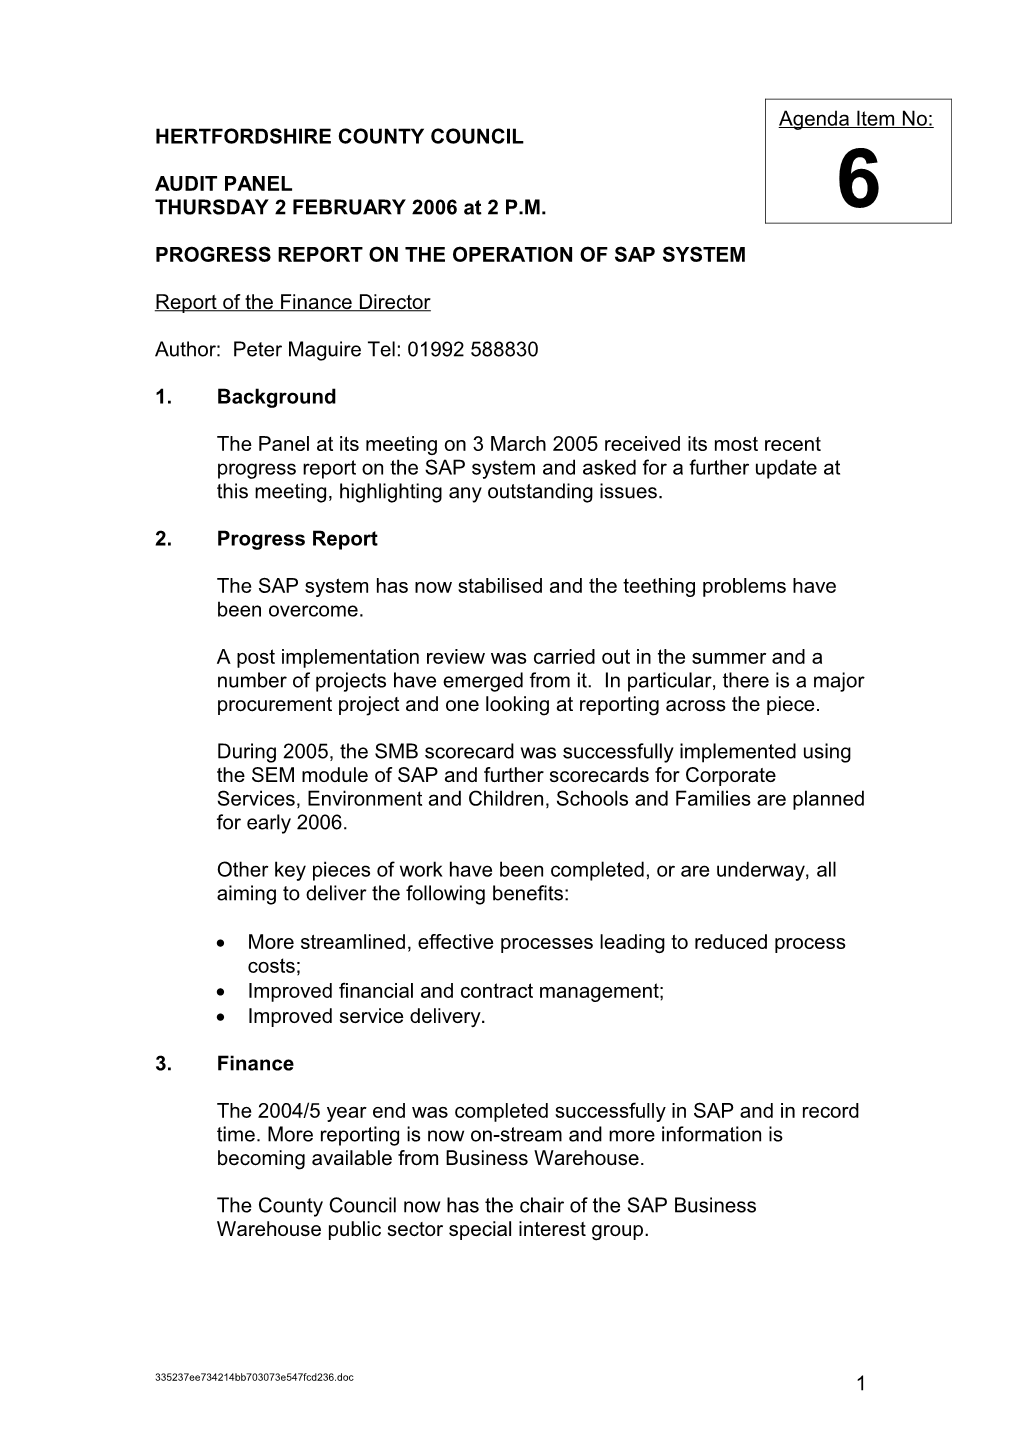 Progress Report on the Operation of Sap System